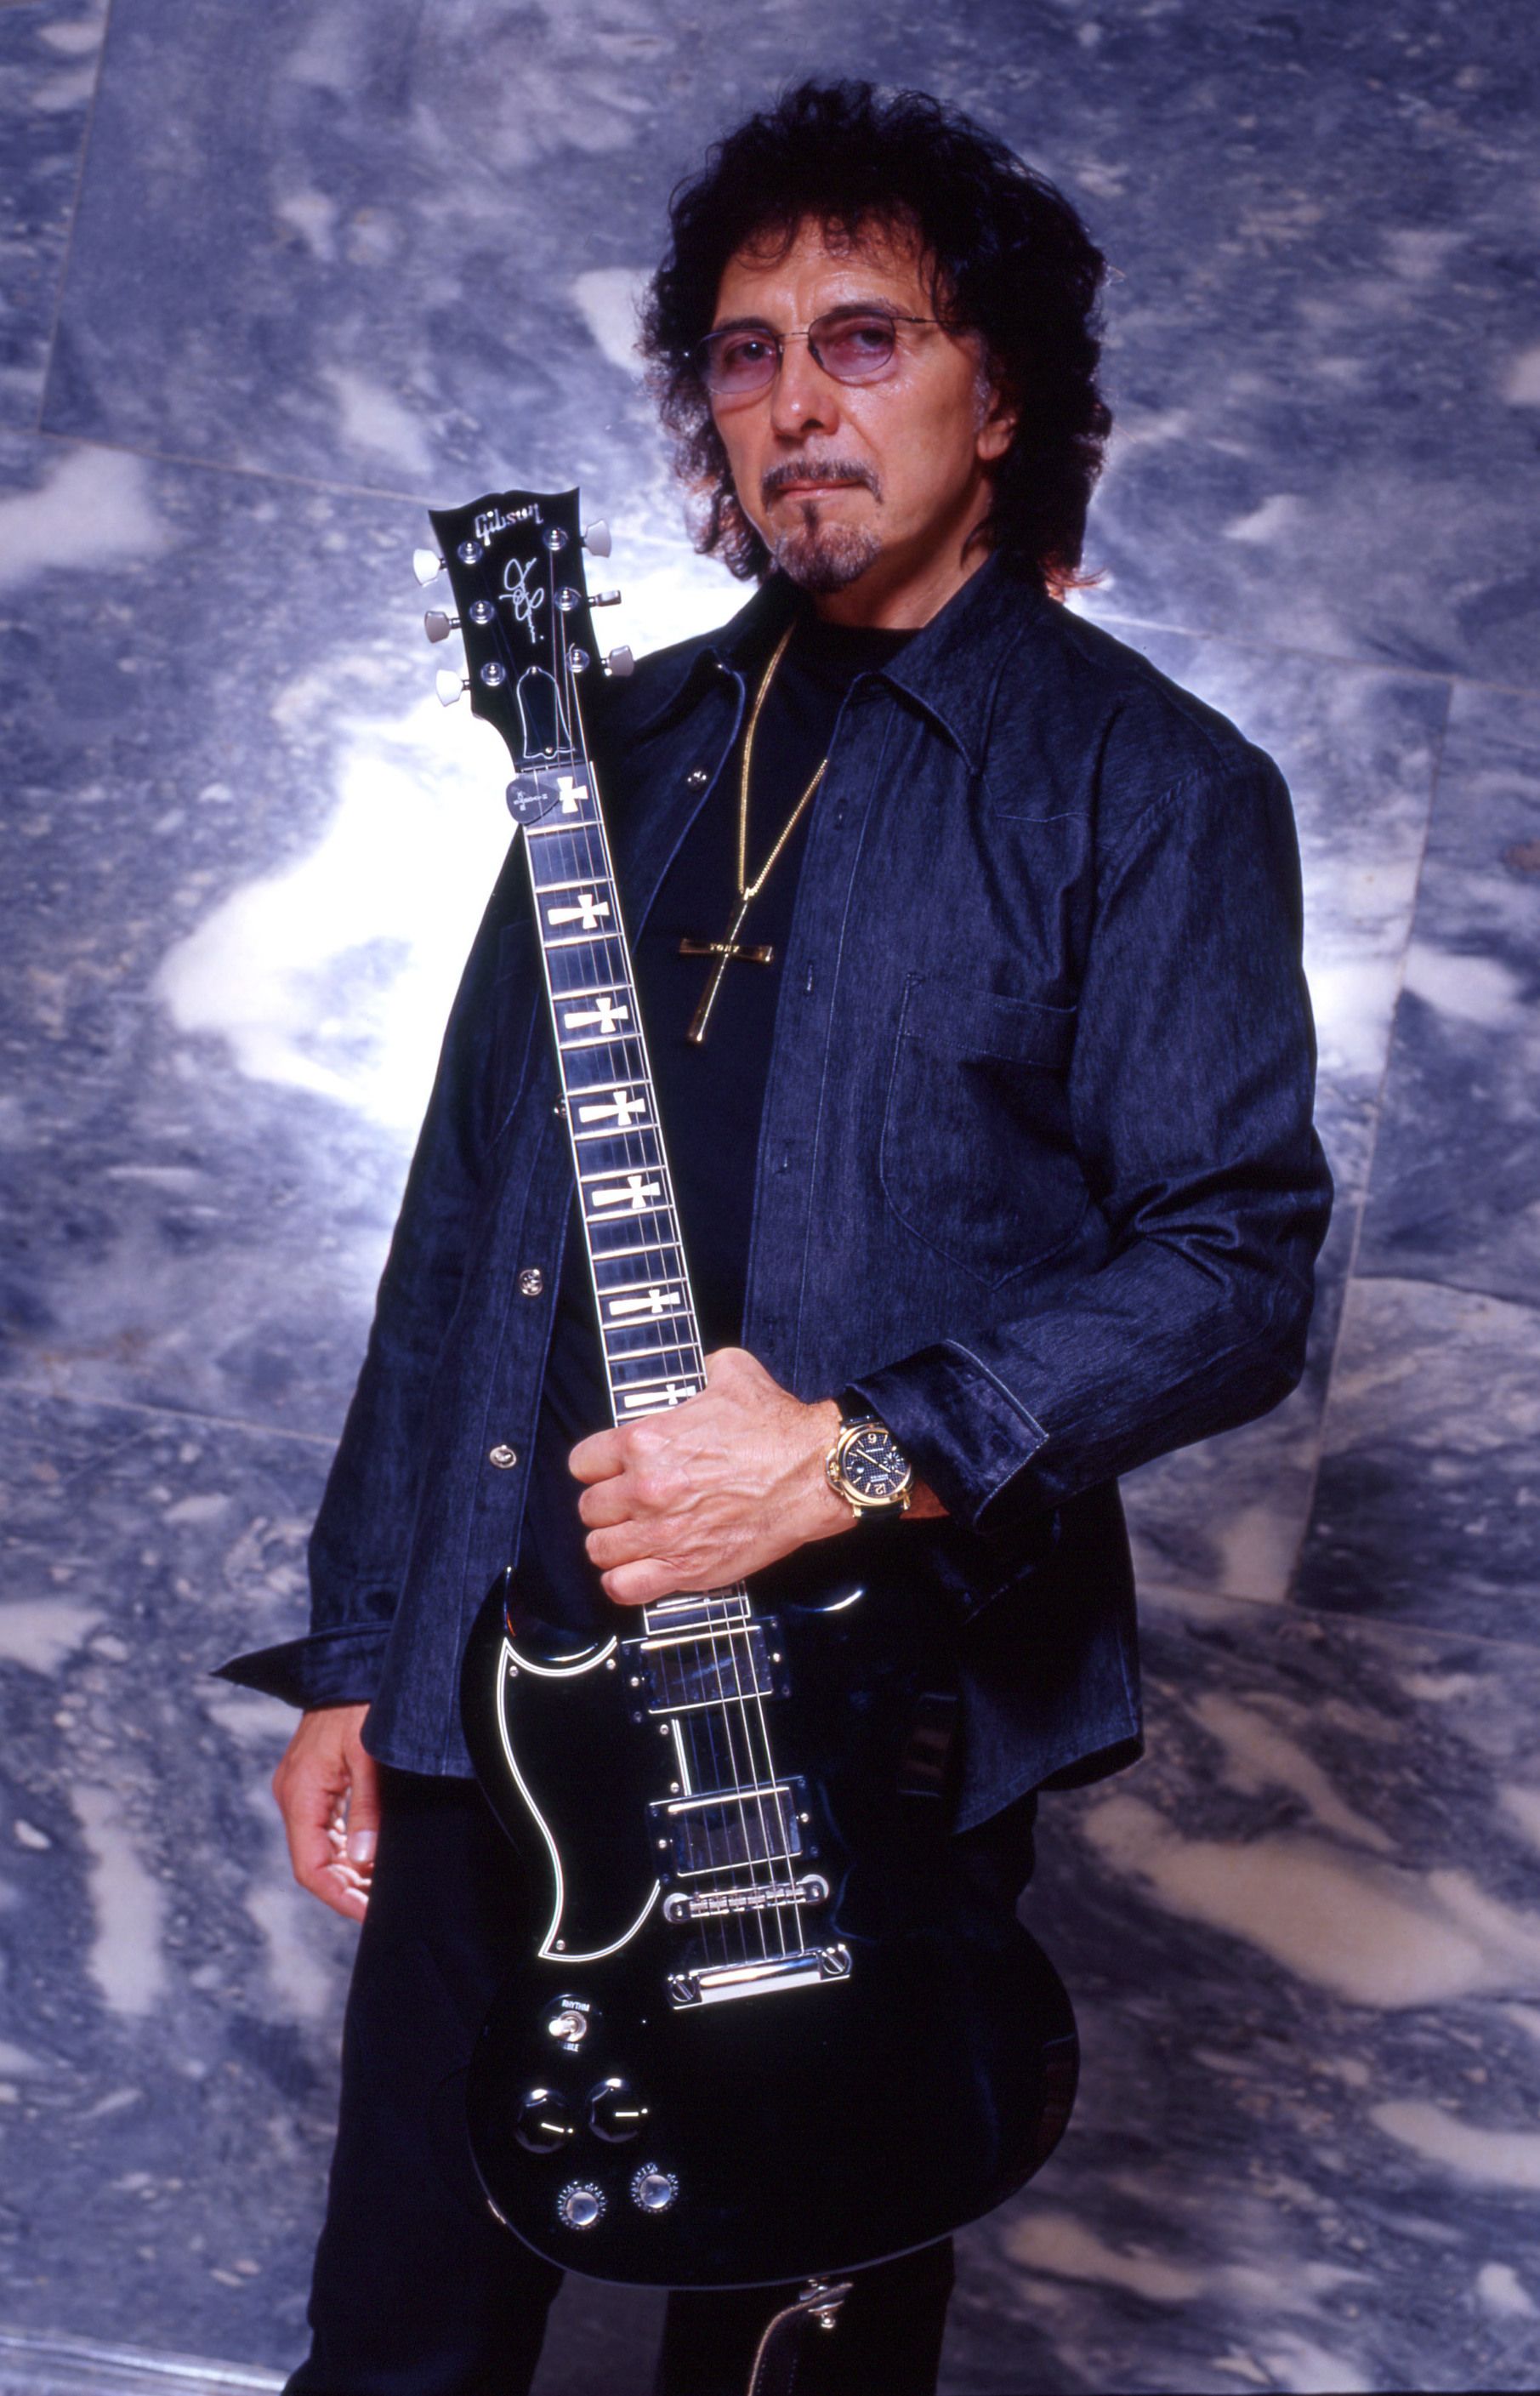 Biography. The Official Tony Iommi Website